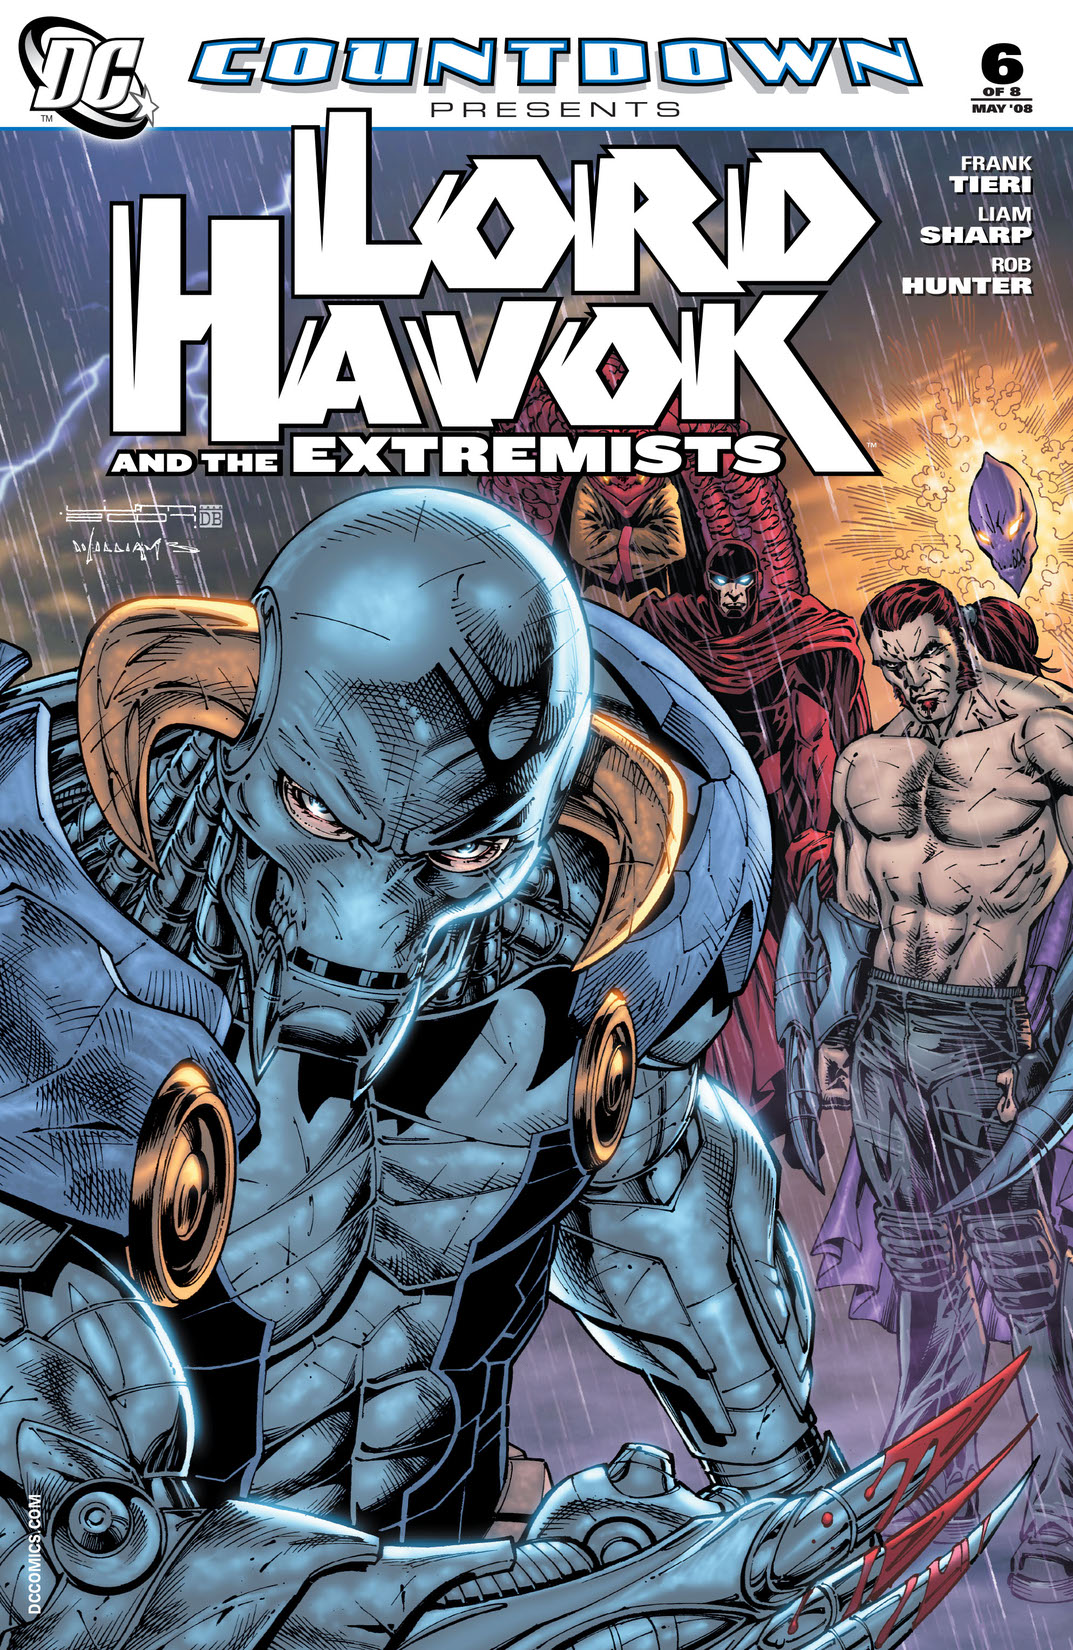 Countdown Presents: Lord Havok & the Extremists #6 preview images